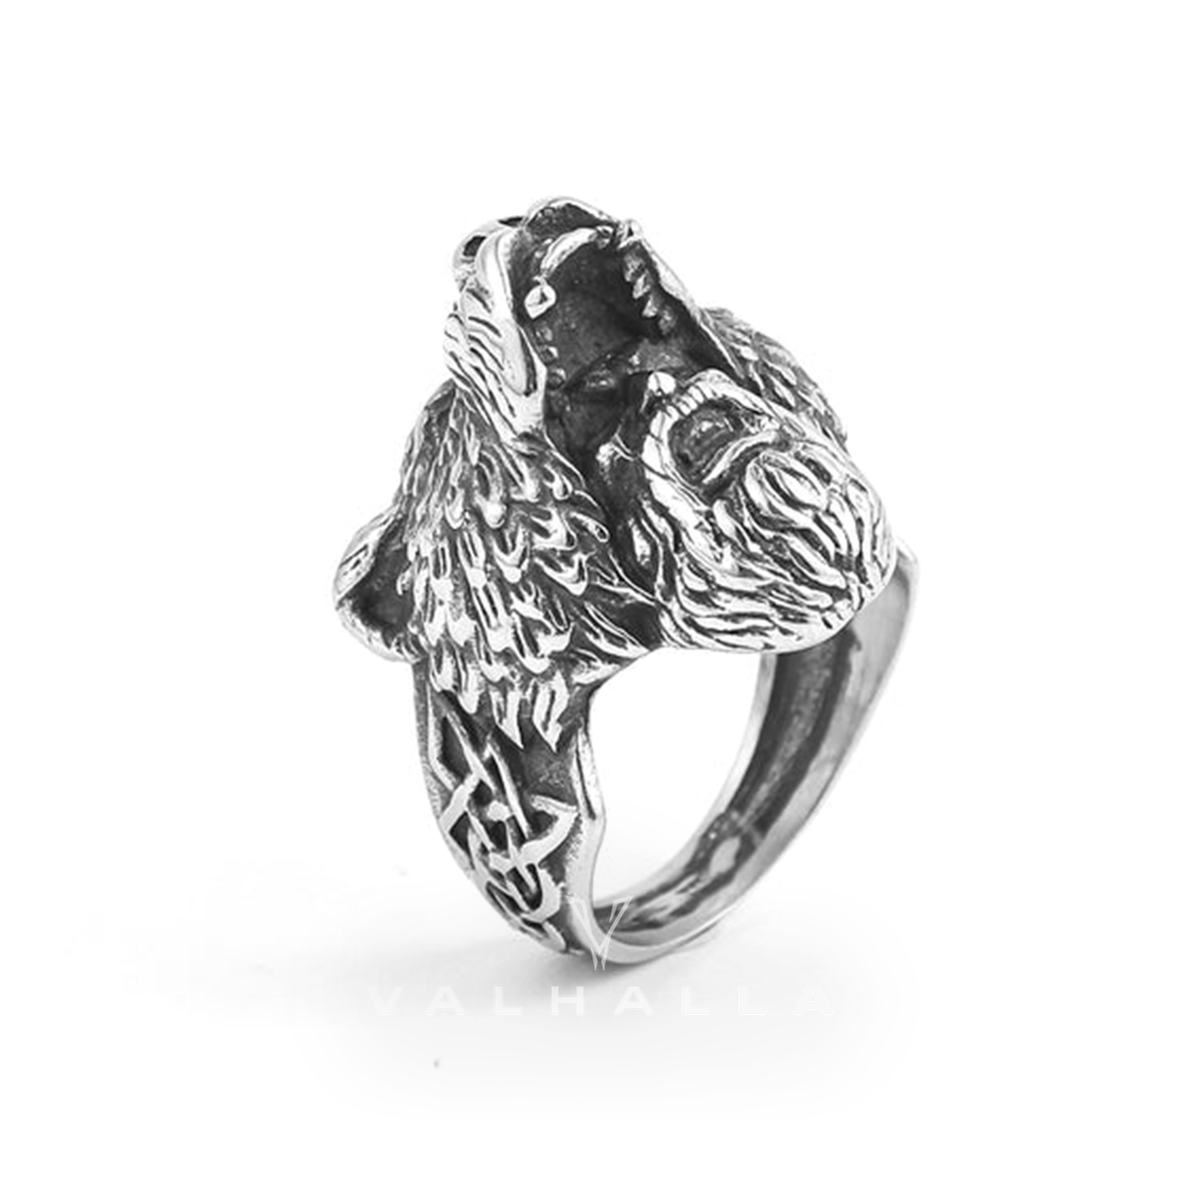 Handcrafted Stainless Steel Odin and Wolf Ring